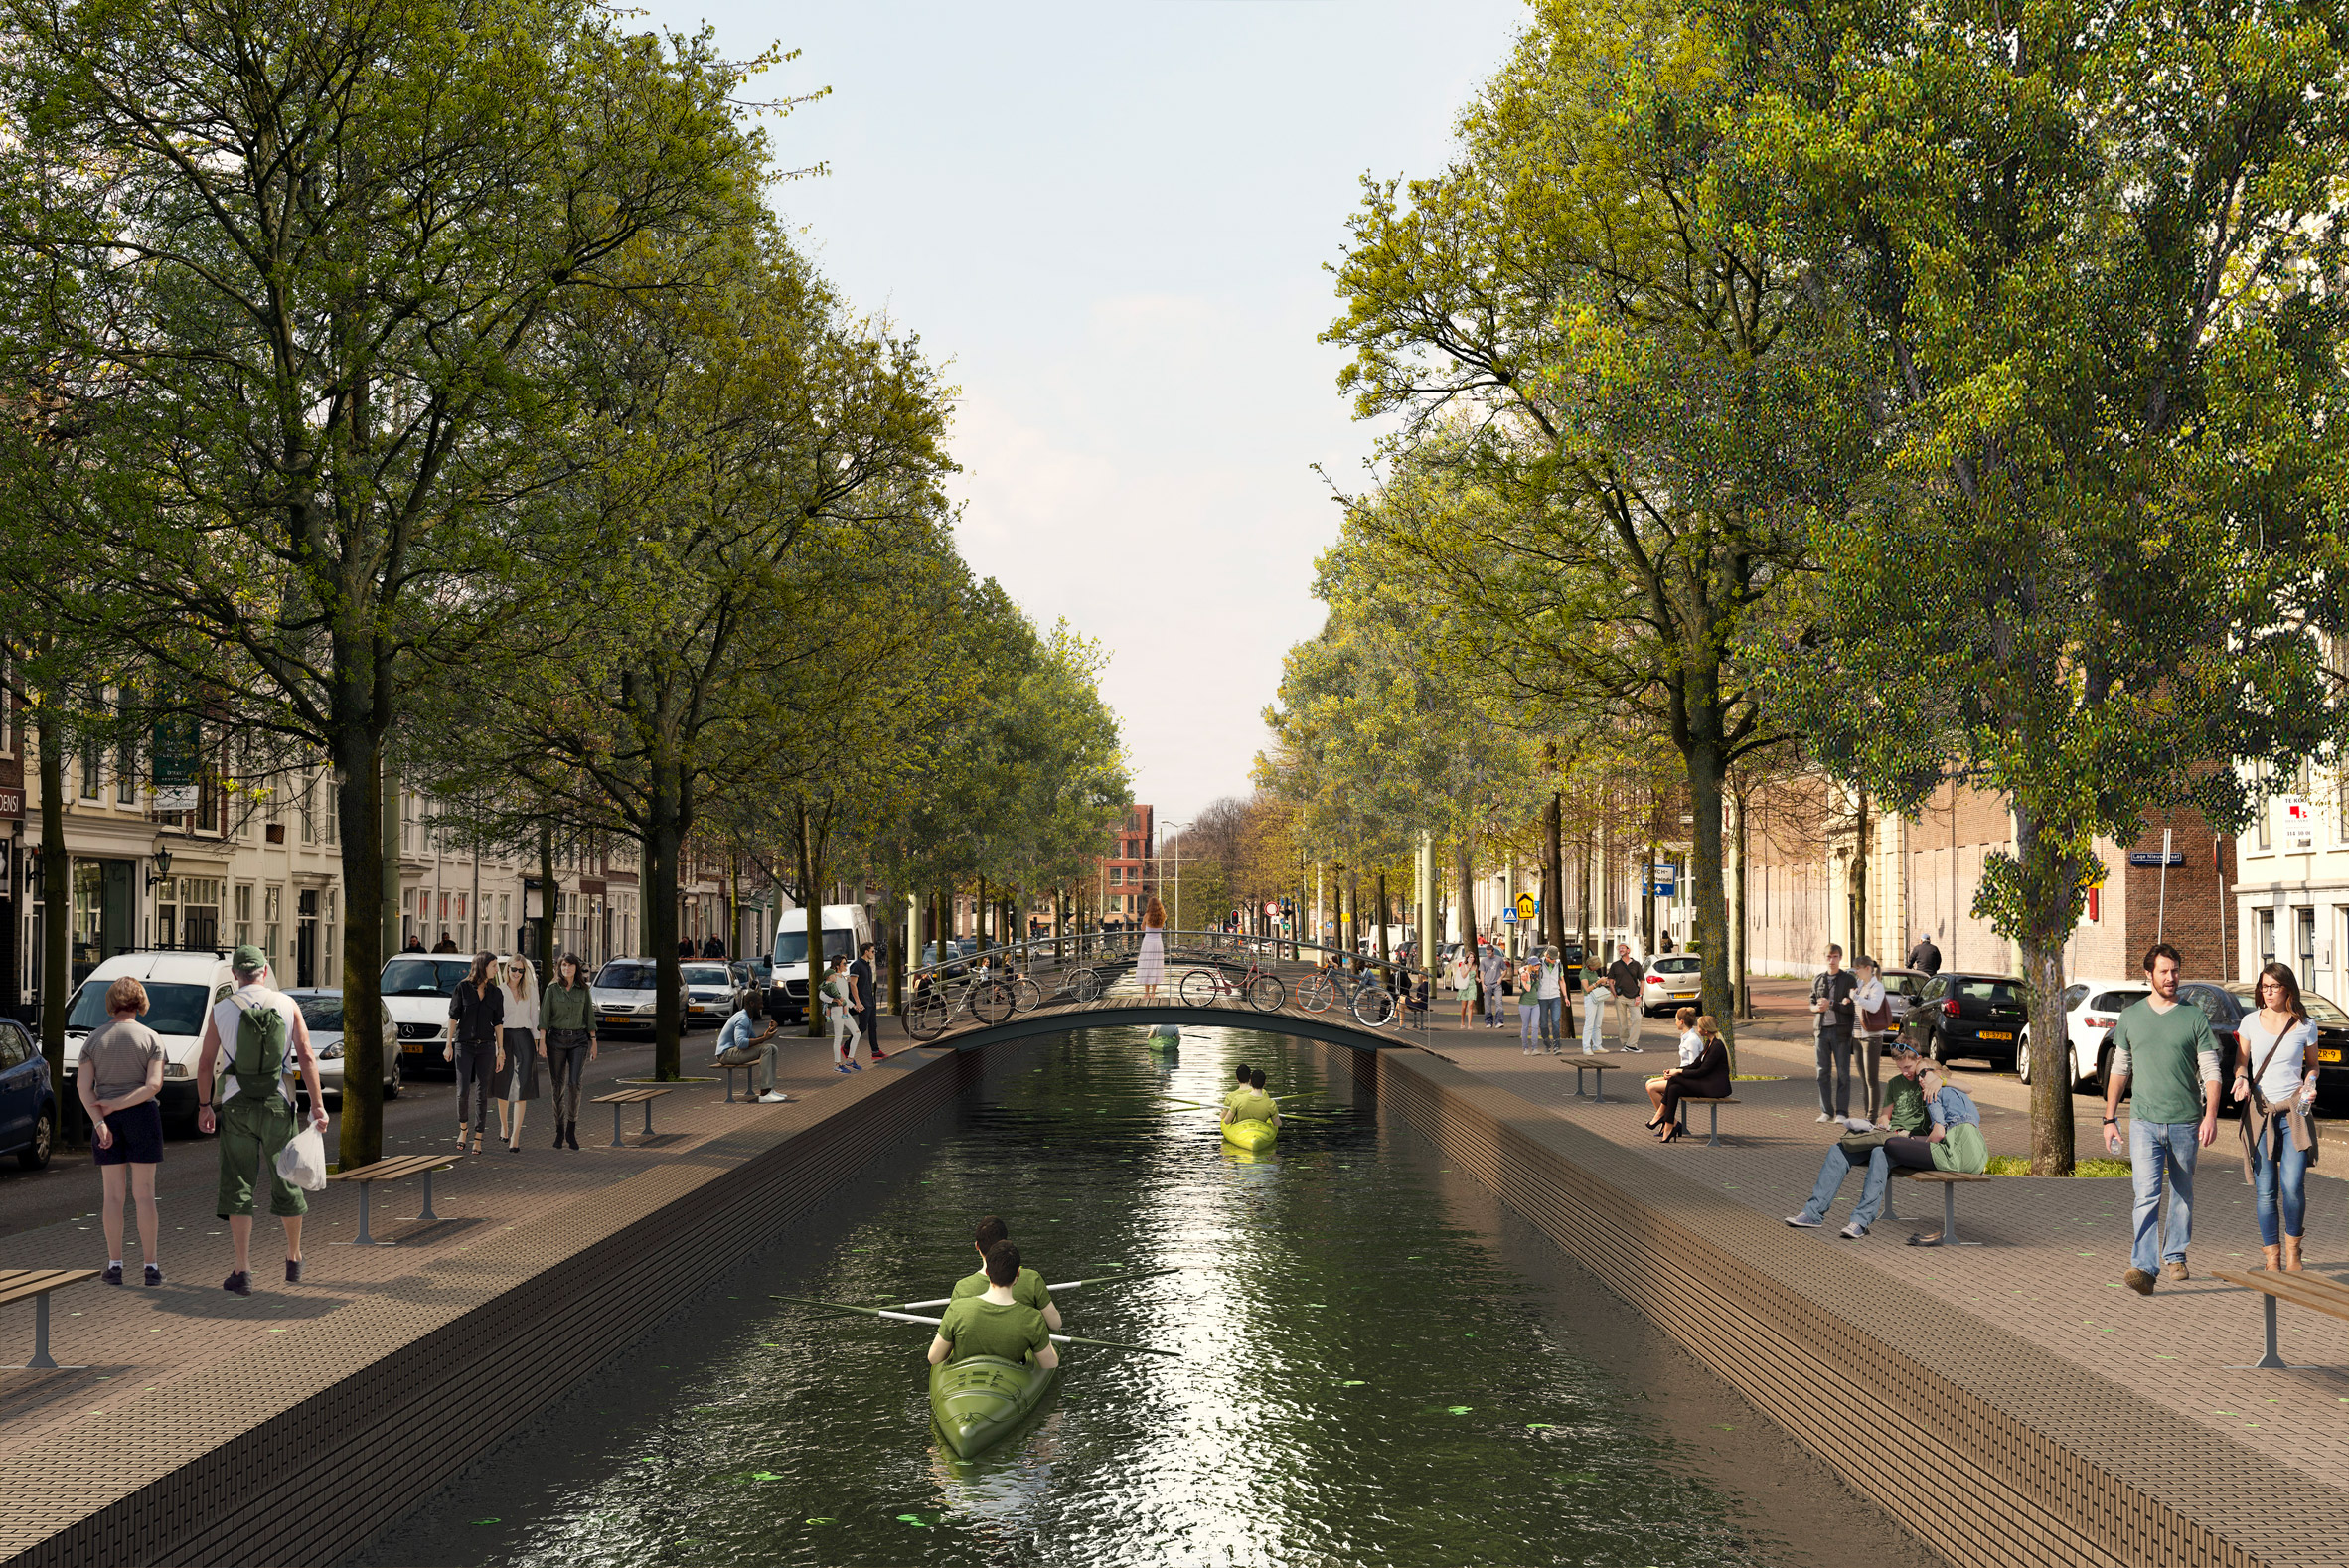 Visuals of The Hague's 17th century canals reopened by MVRDV